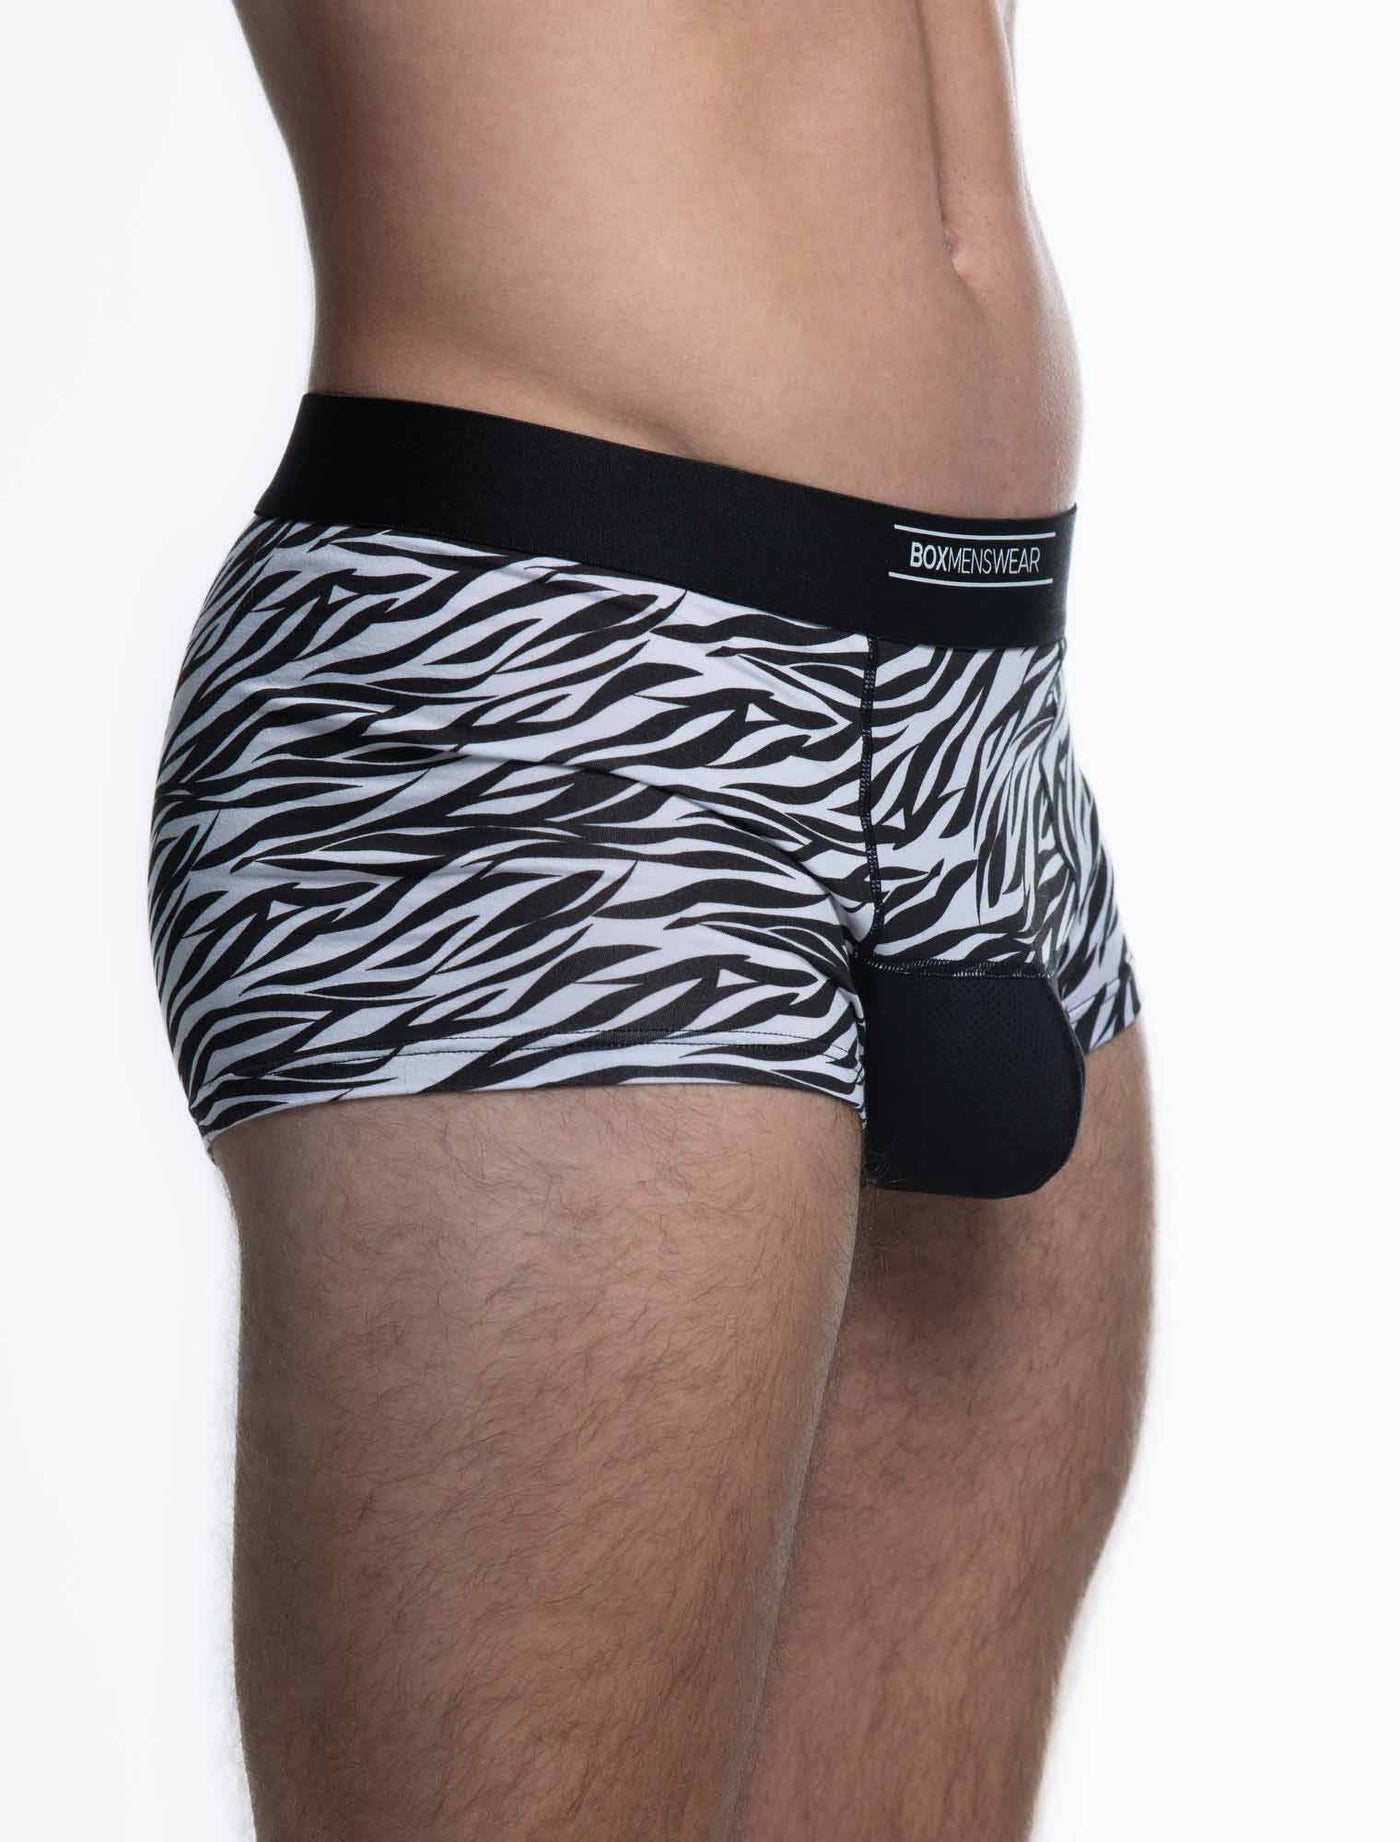 'Just The Tip' Boxers - Zebra - boxmenswear - {{variant_title}}